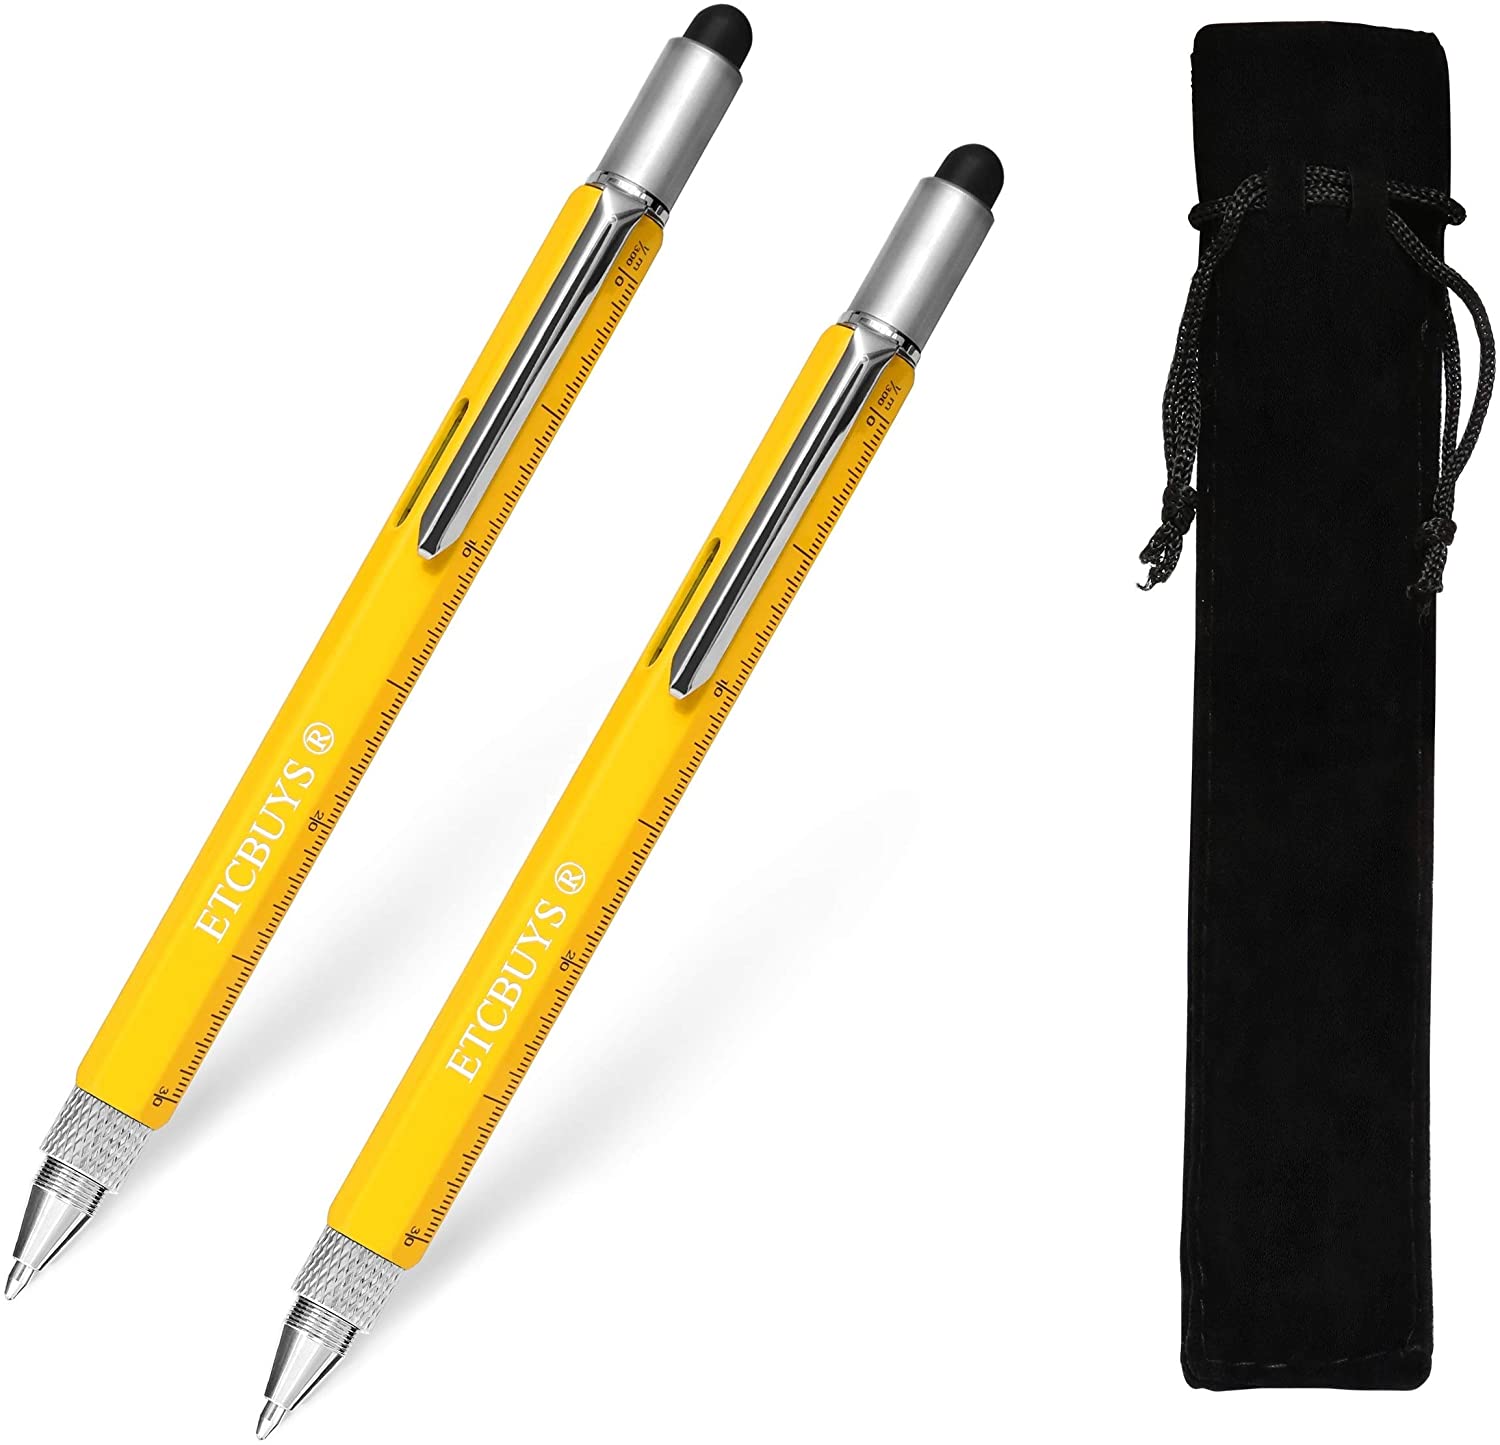 ETCBUYS Screwdriver Pen Pocket Multi Tool 6 in 1 - Yellow 2 Pack